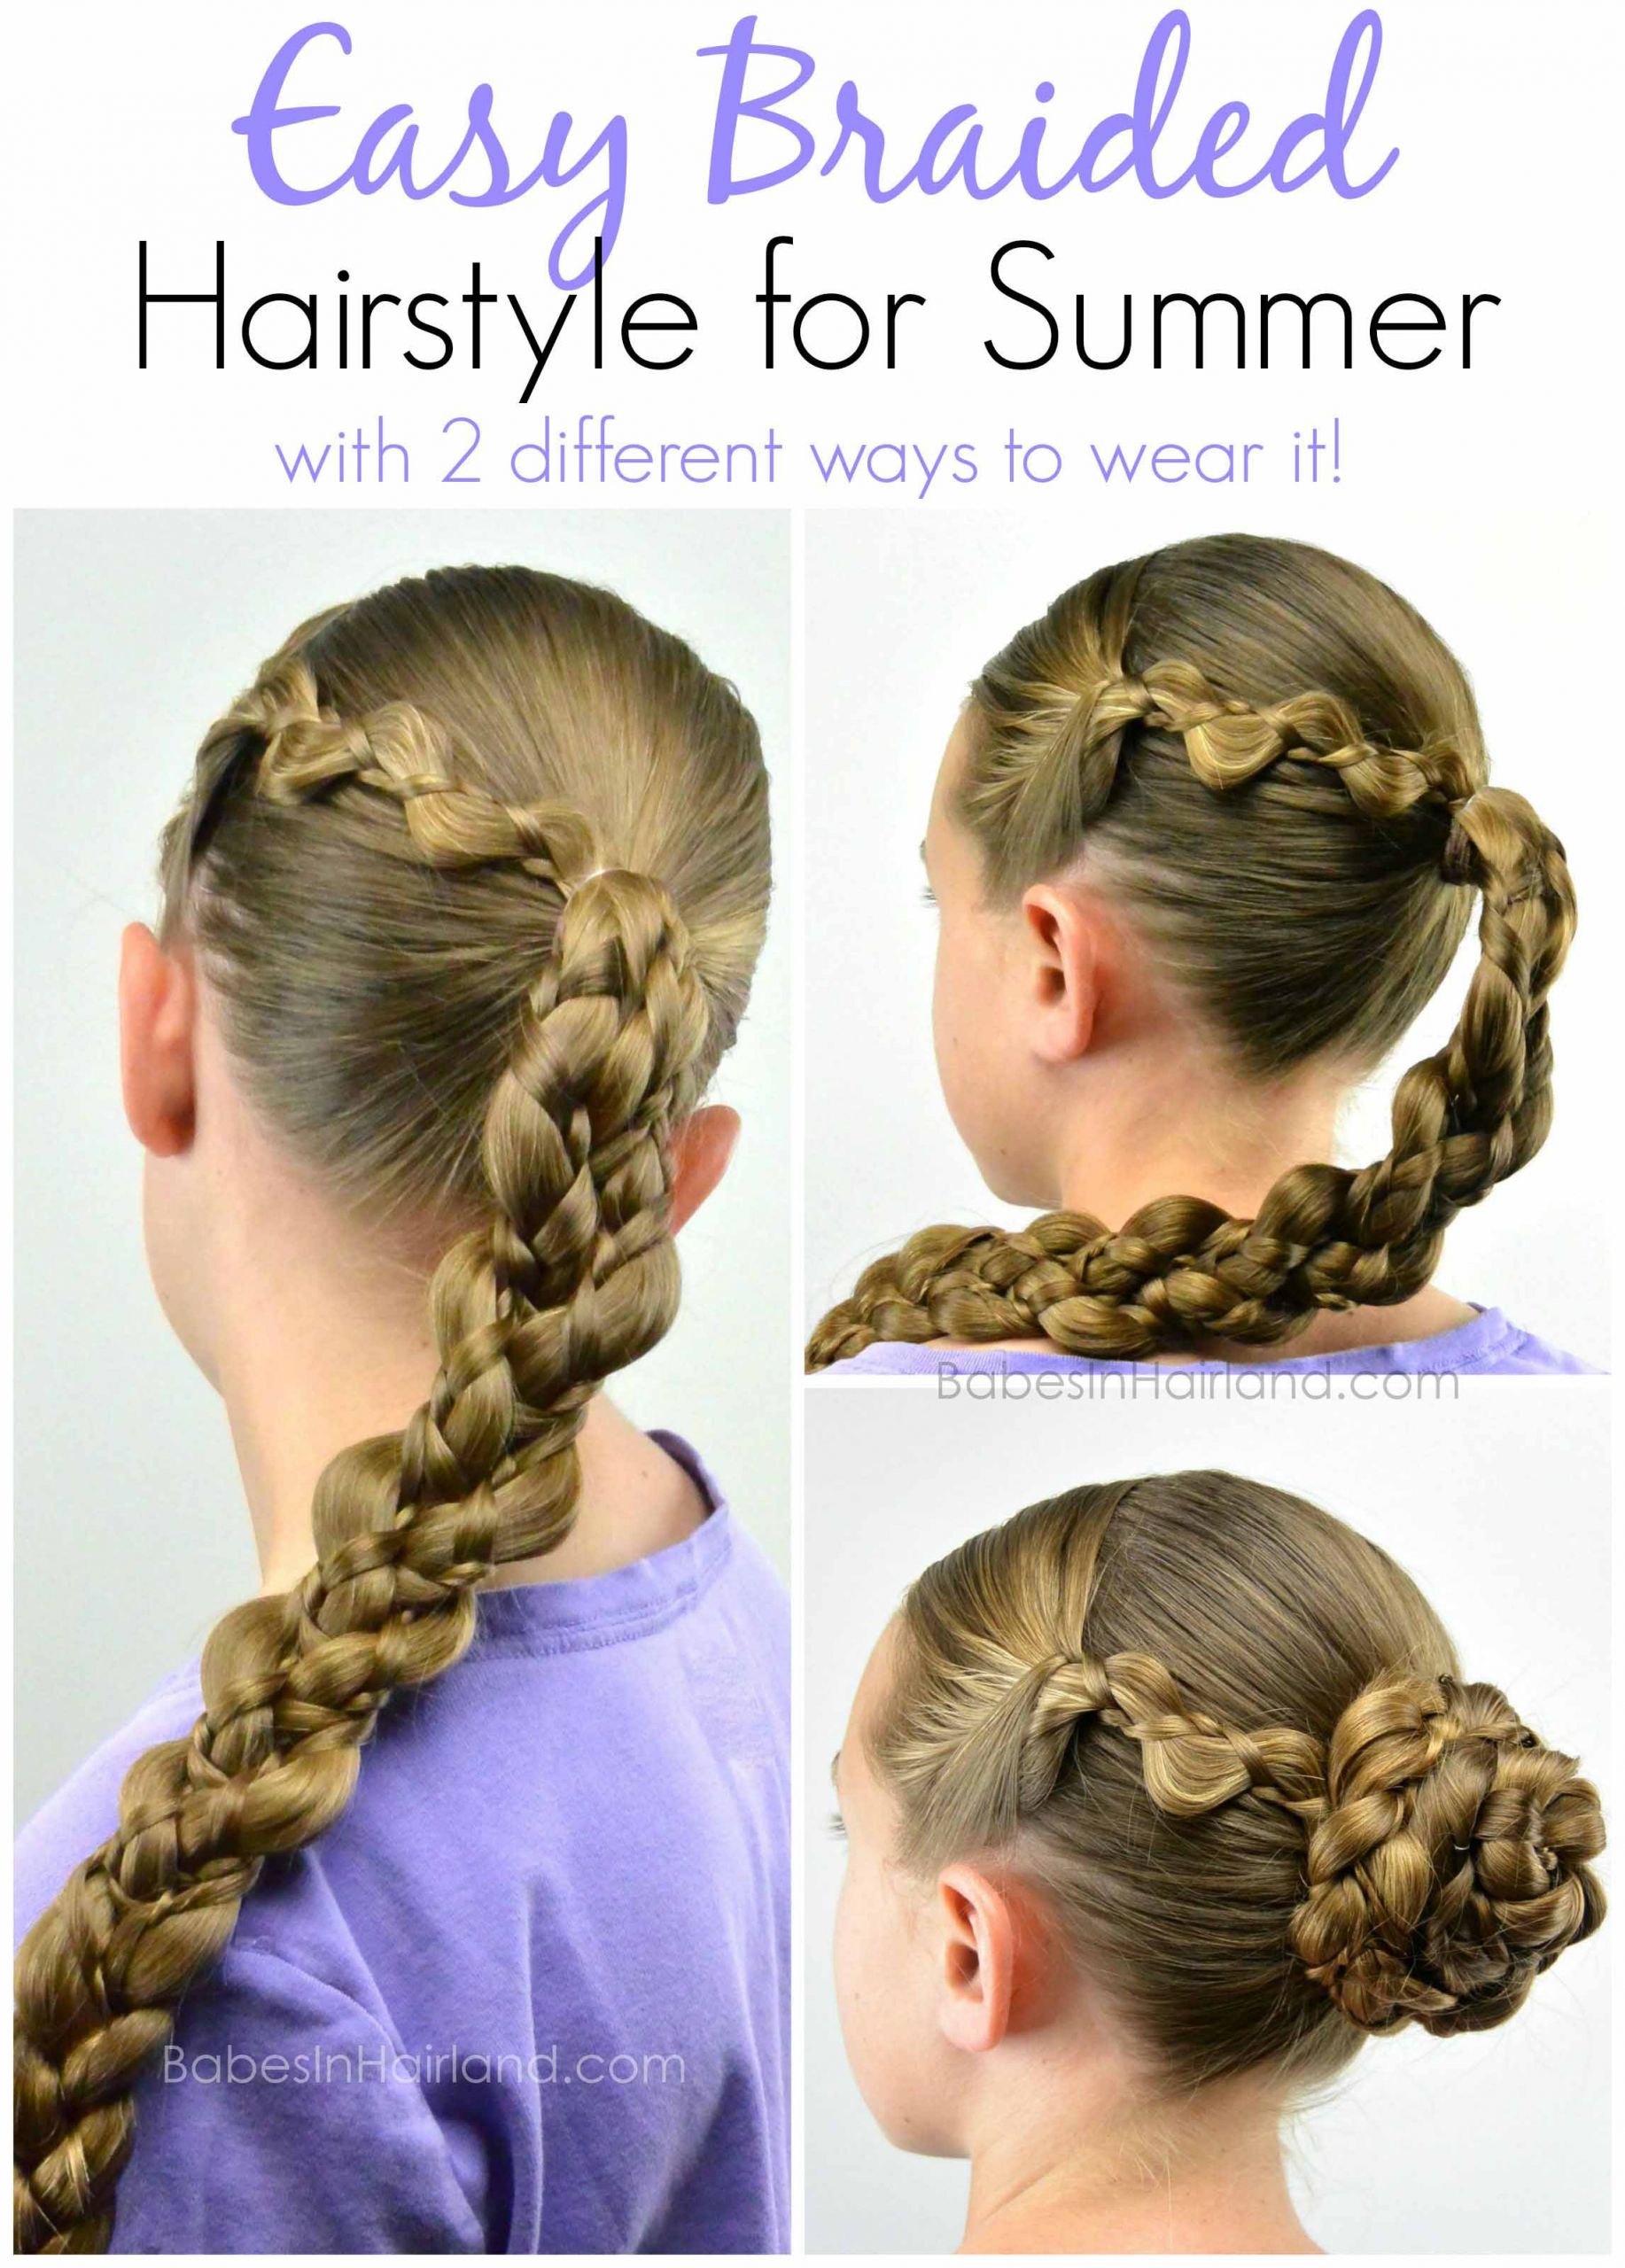 Easy Summer Hairstyles For Medium Hair
 Easy Braided Hairstyle for Summer Babes In Hairland